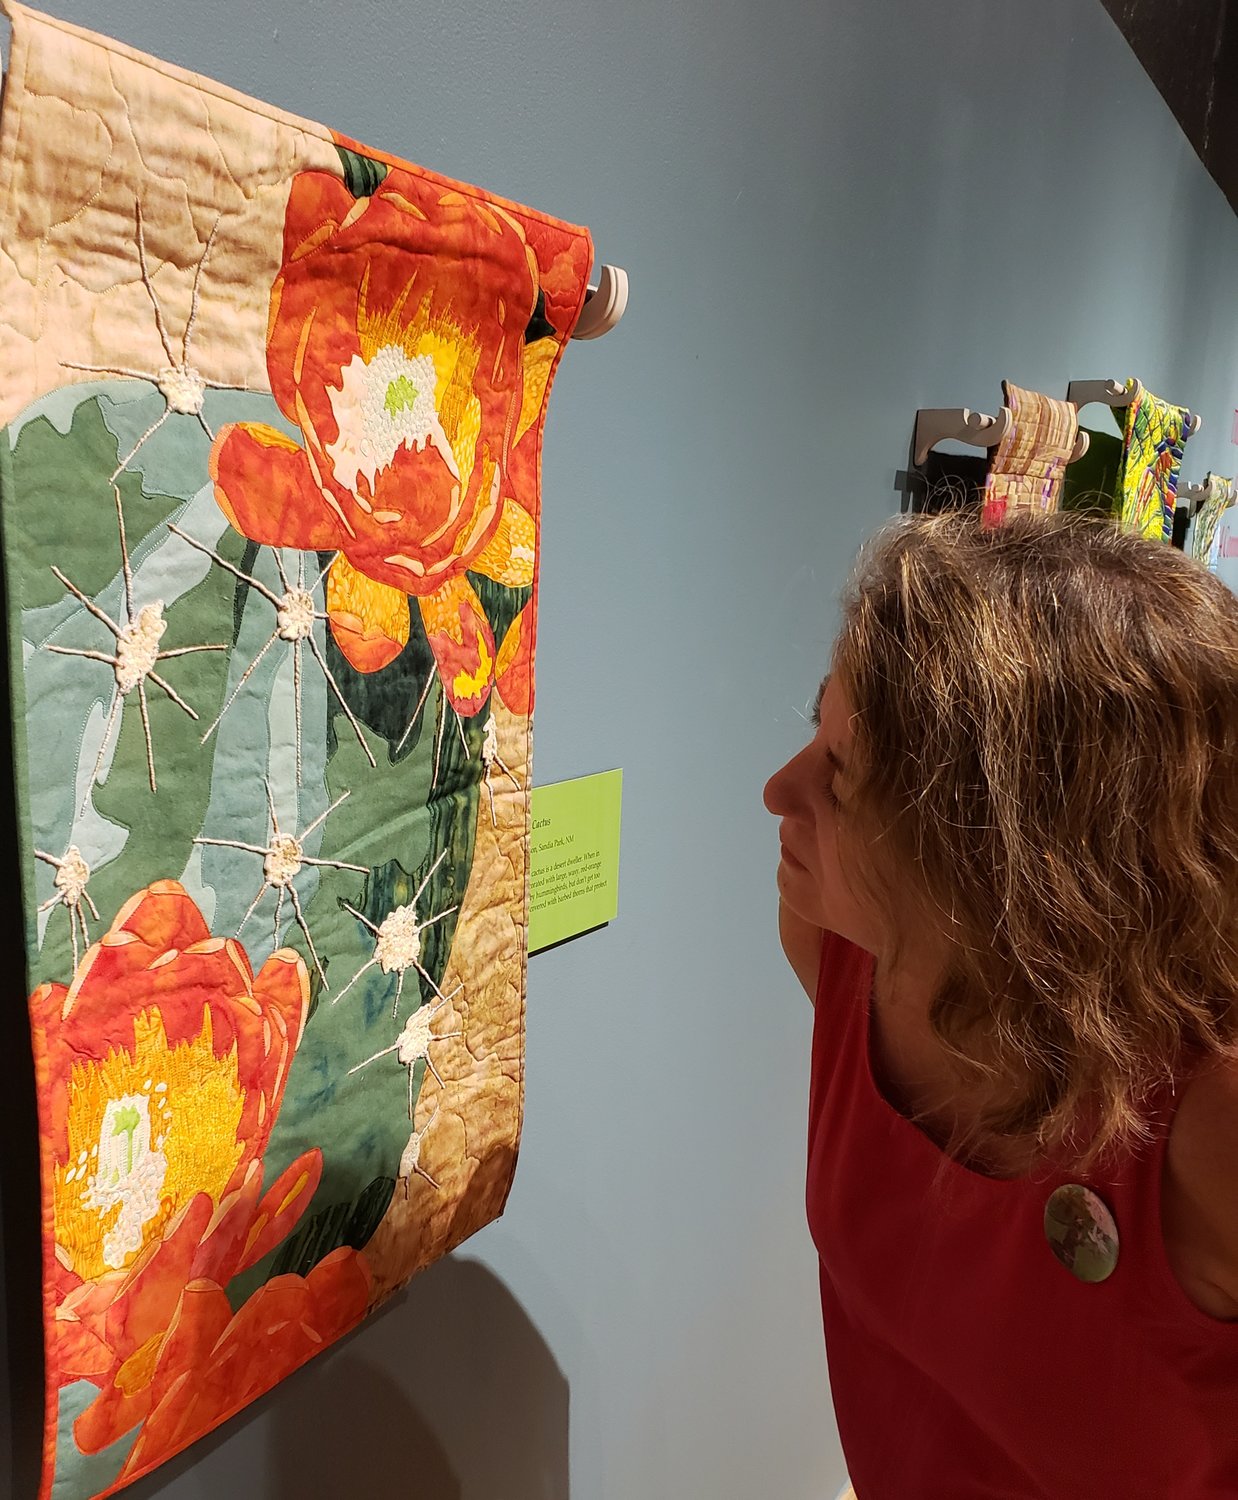 Tauna gets really up close and personal with the Claret Cup Cactus quilt, noticing how the quilter embroidered with yarn to create the spines.